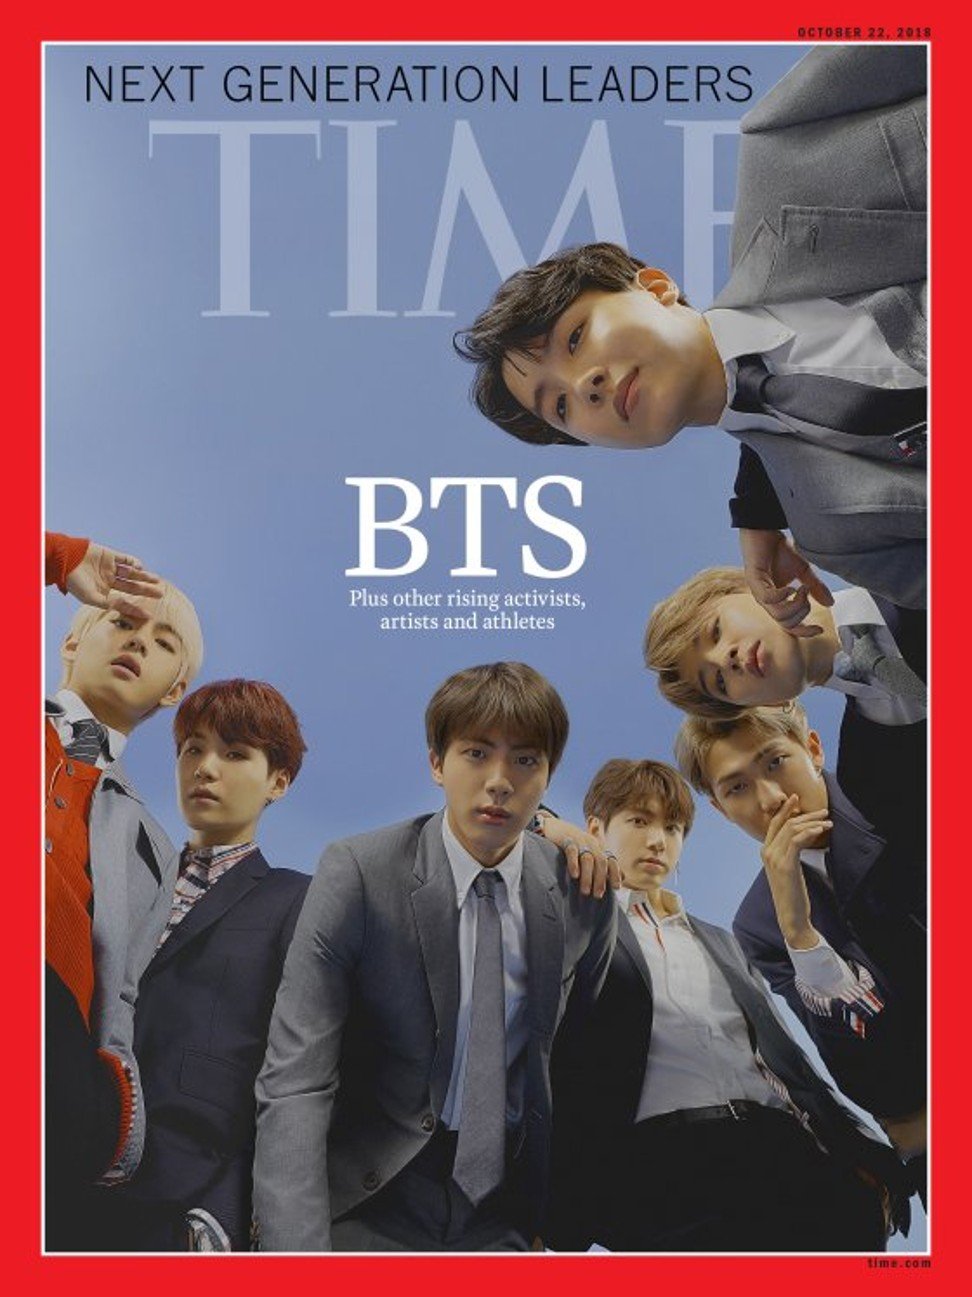 K-pop group BTS is featured on the cover of Time magazine, after being included among a group of its ‘Next Generation Leaders’. Photo: TIME.com